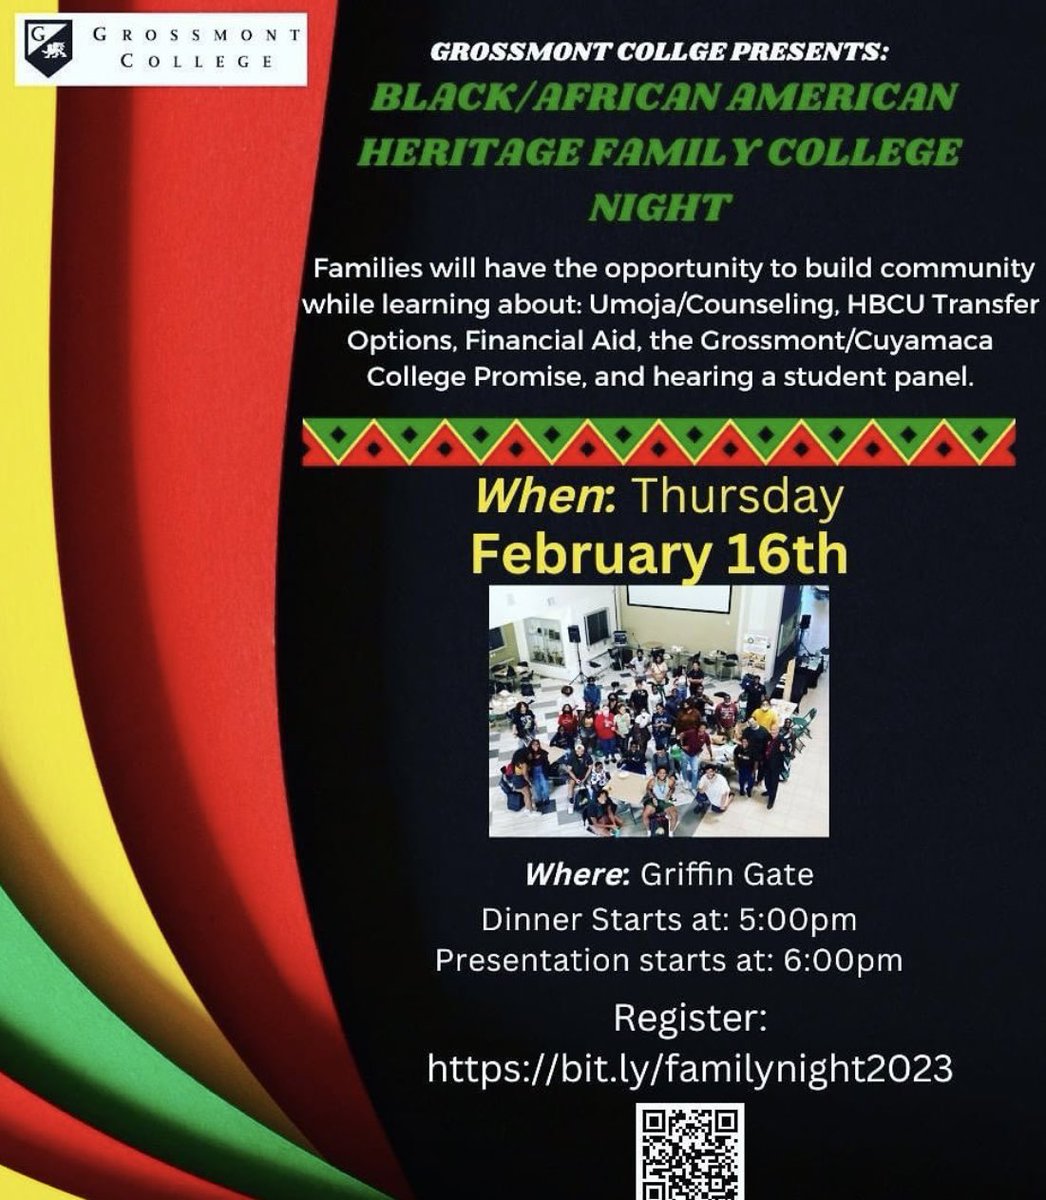 Black/African American Family College Night at Grossmont College on 2/16. Please share broadly and hope to you there! #studentsuccess #family #community #collegesuccess